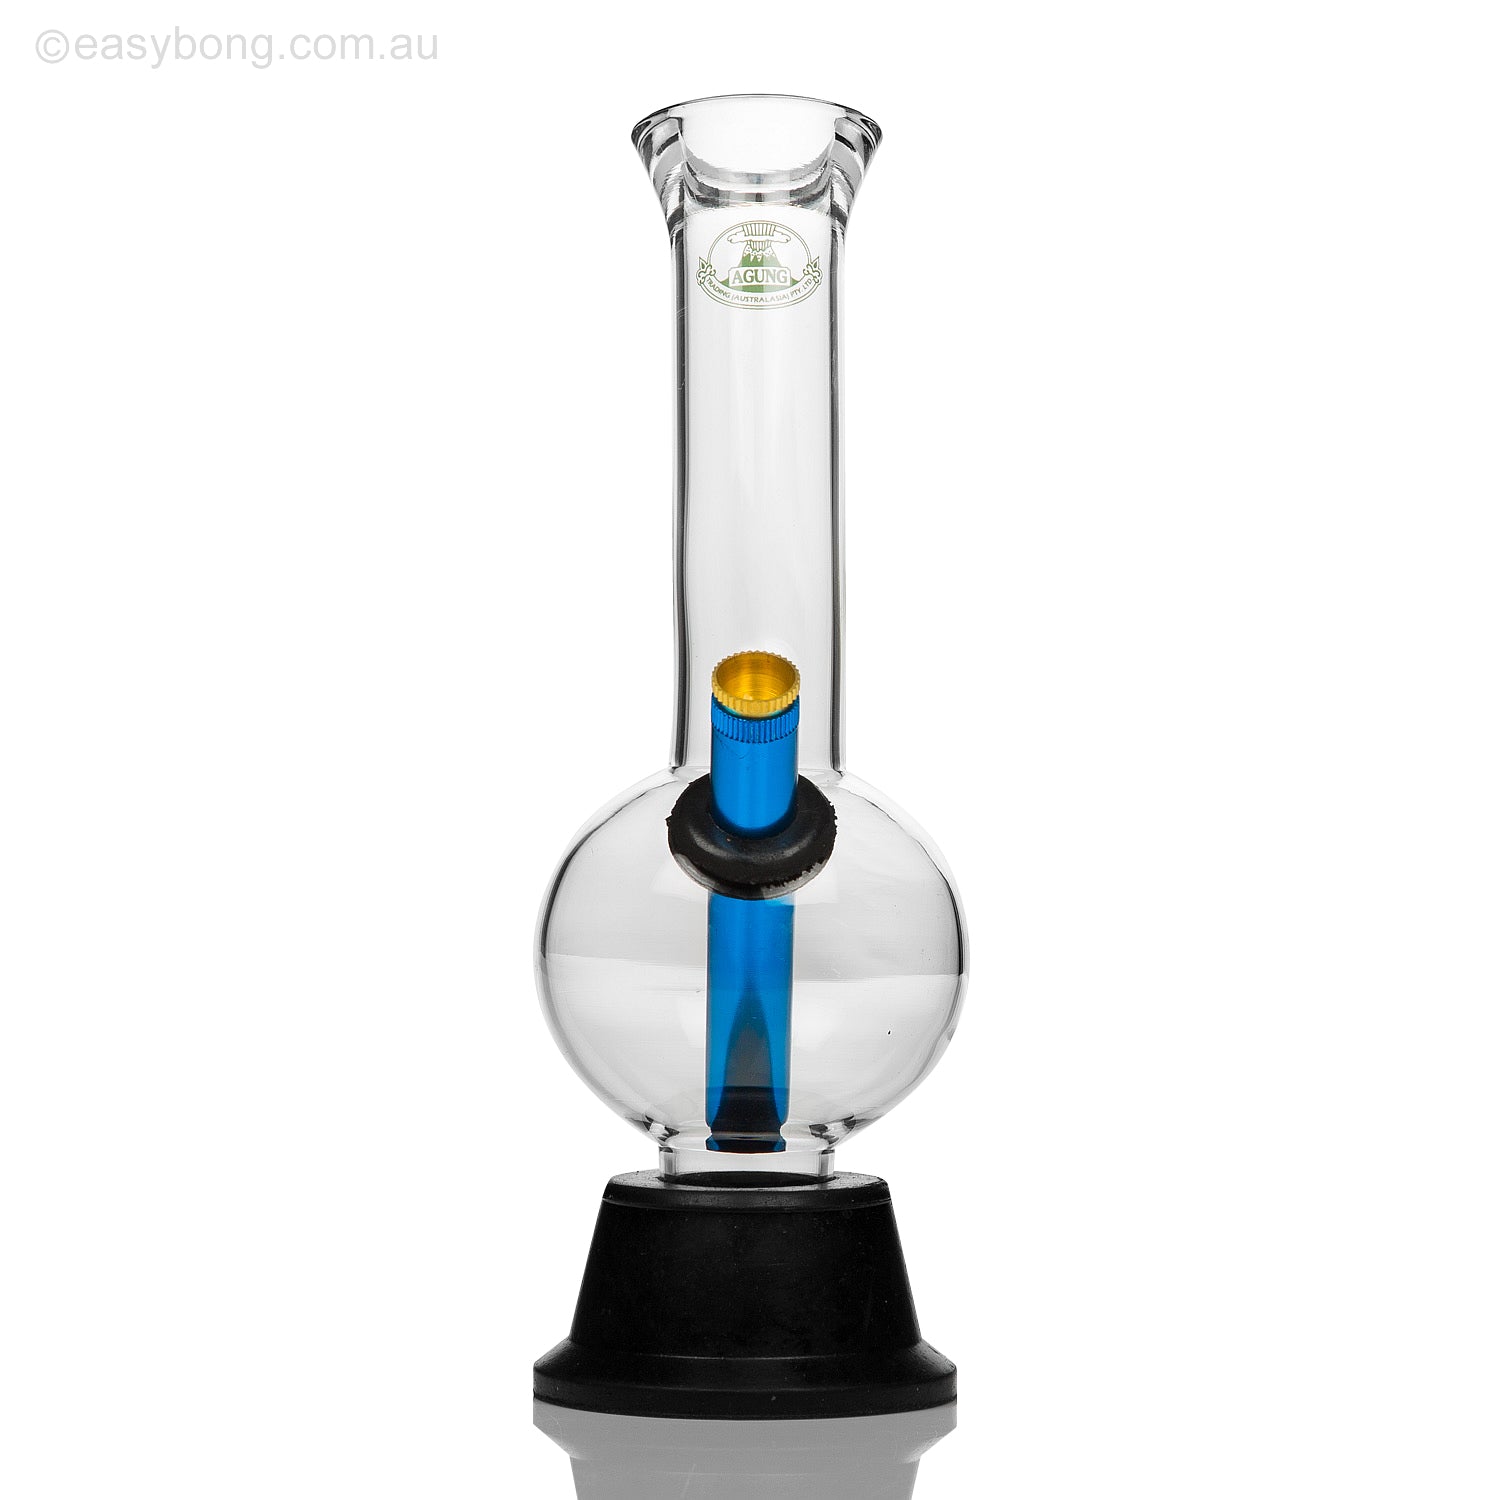 Agung glass bong with metal stem and brass cone piece for Aussie weed smokers.